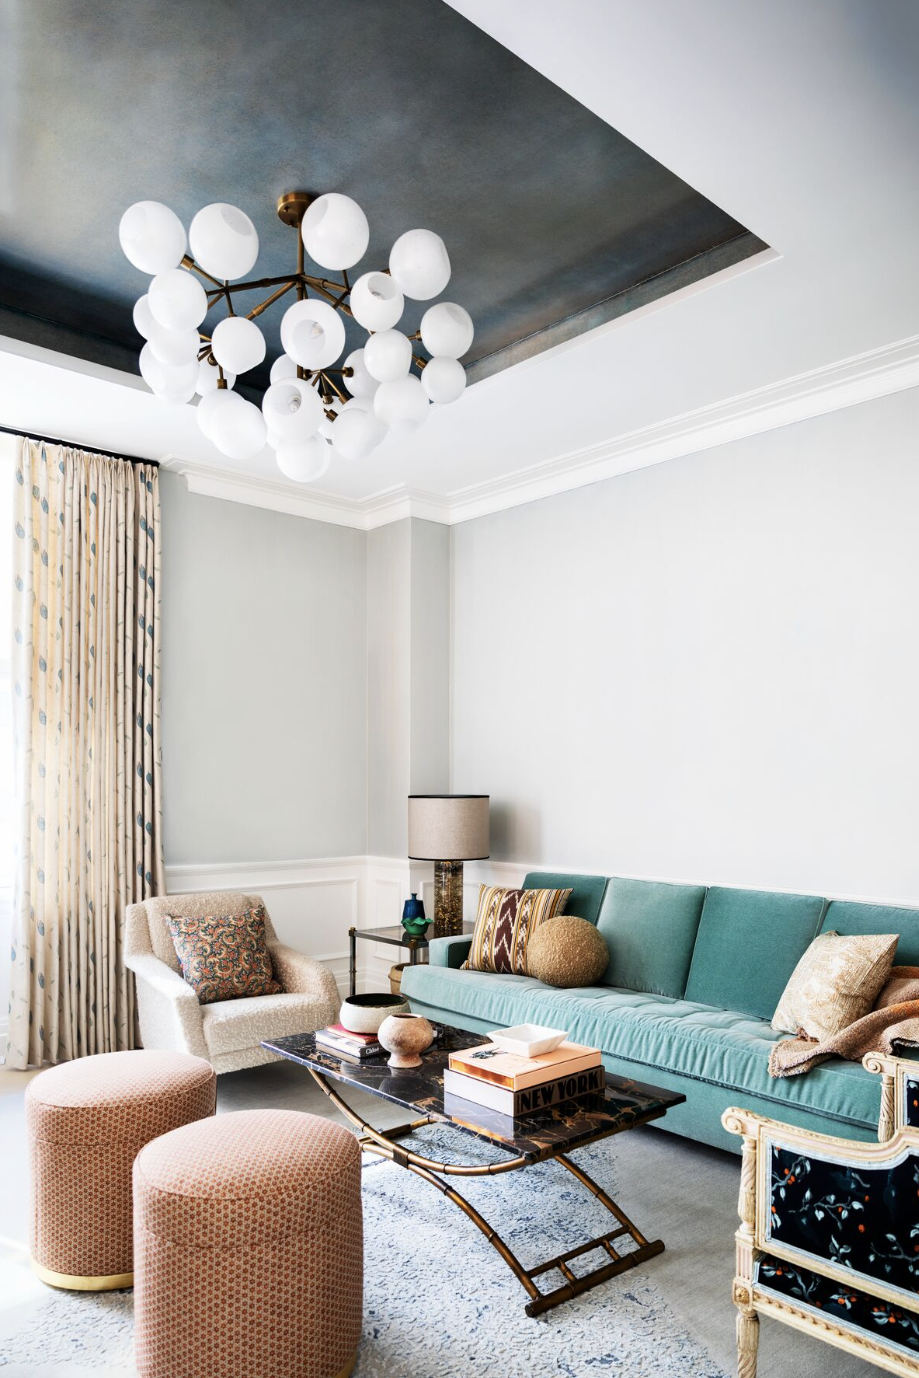 Living room ideas, tray ceiling in a room with globe lighting and turquoise sofa